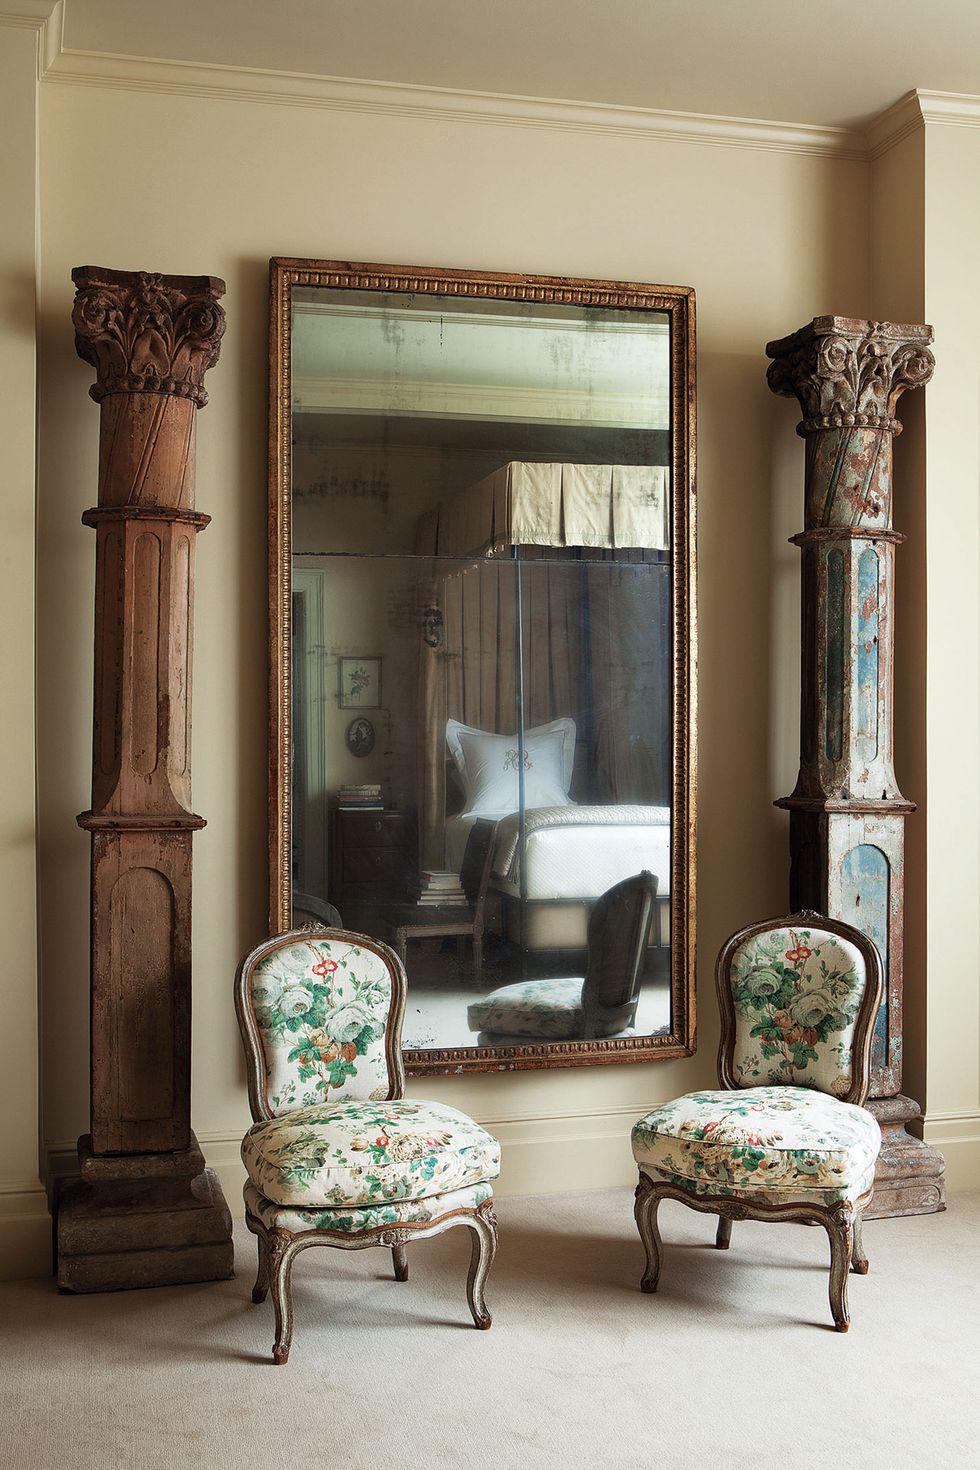 two armless chairs in a floral pattern and a between in s large wood framed mirror and two tall wooden distressed columns flanking it